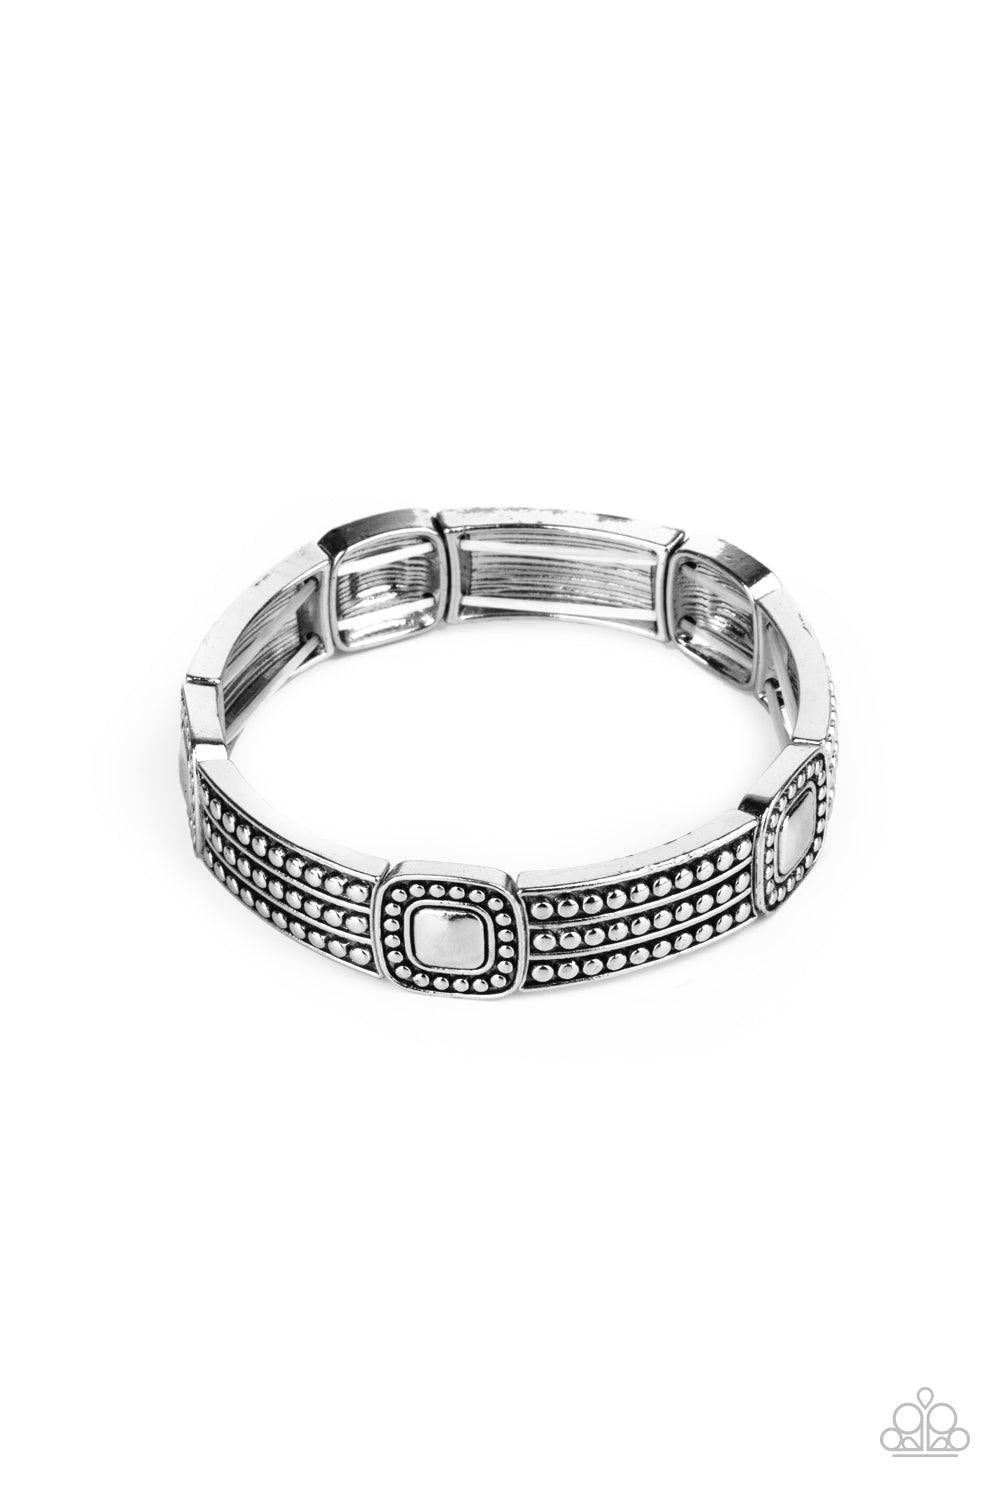 Paparazzi Accessories Rustic Redux - Silver Featuring silver studded patterns, square and rectangular frames are threaded along stretchy bands around the wrist for a rustic flair. Sold as one individual bracelet. Jewelry